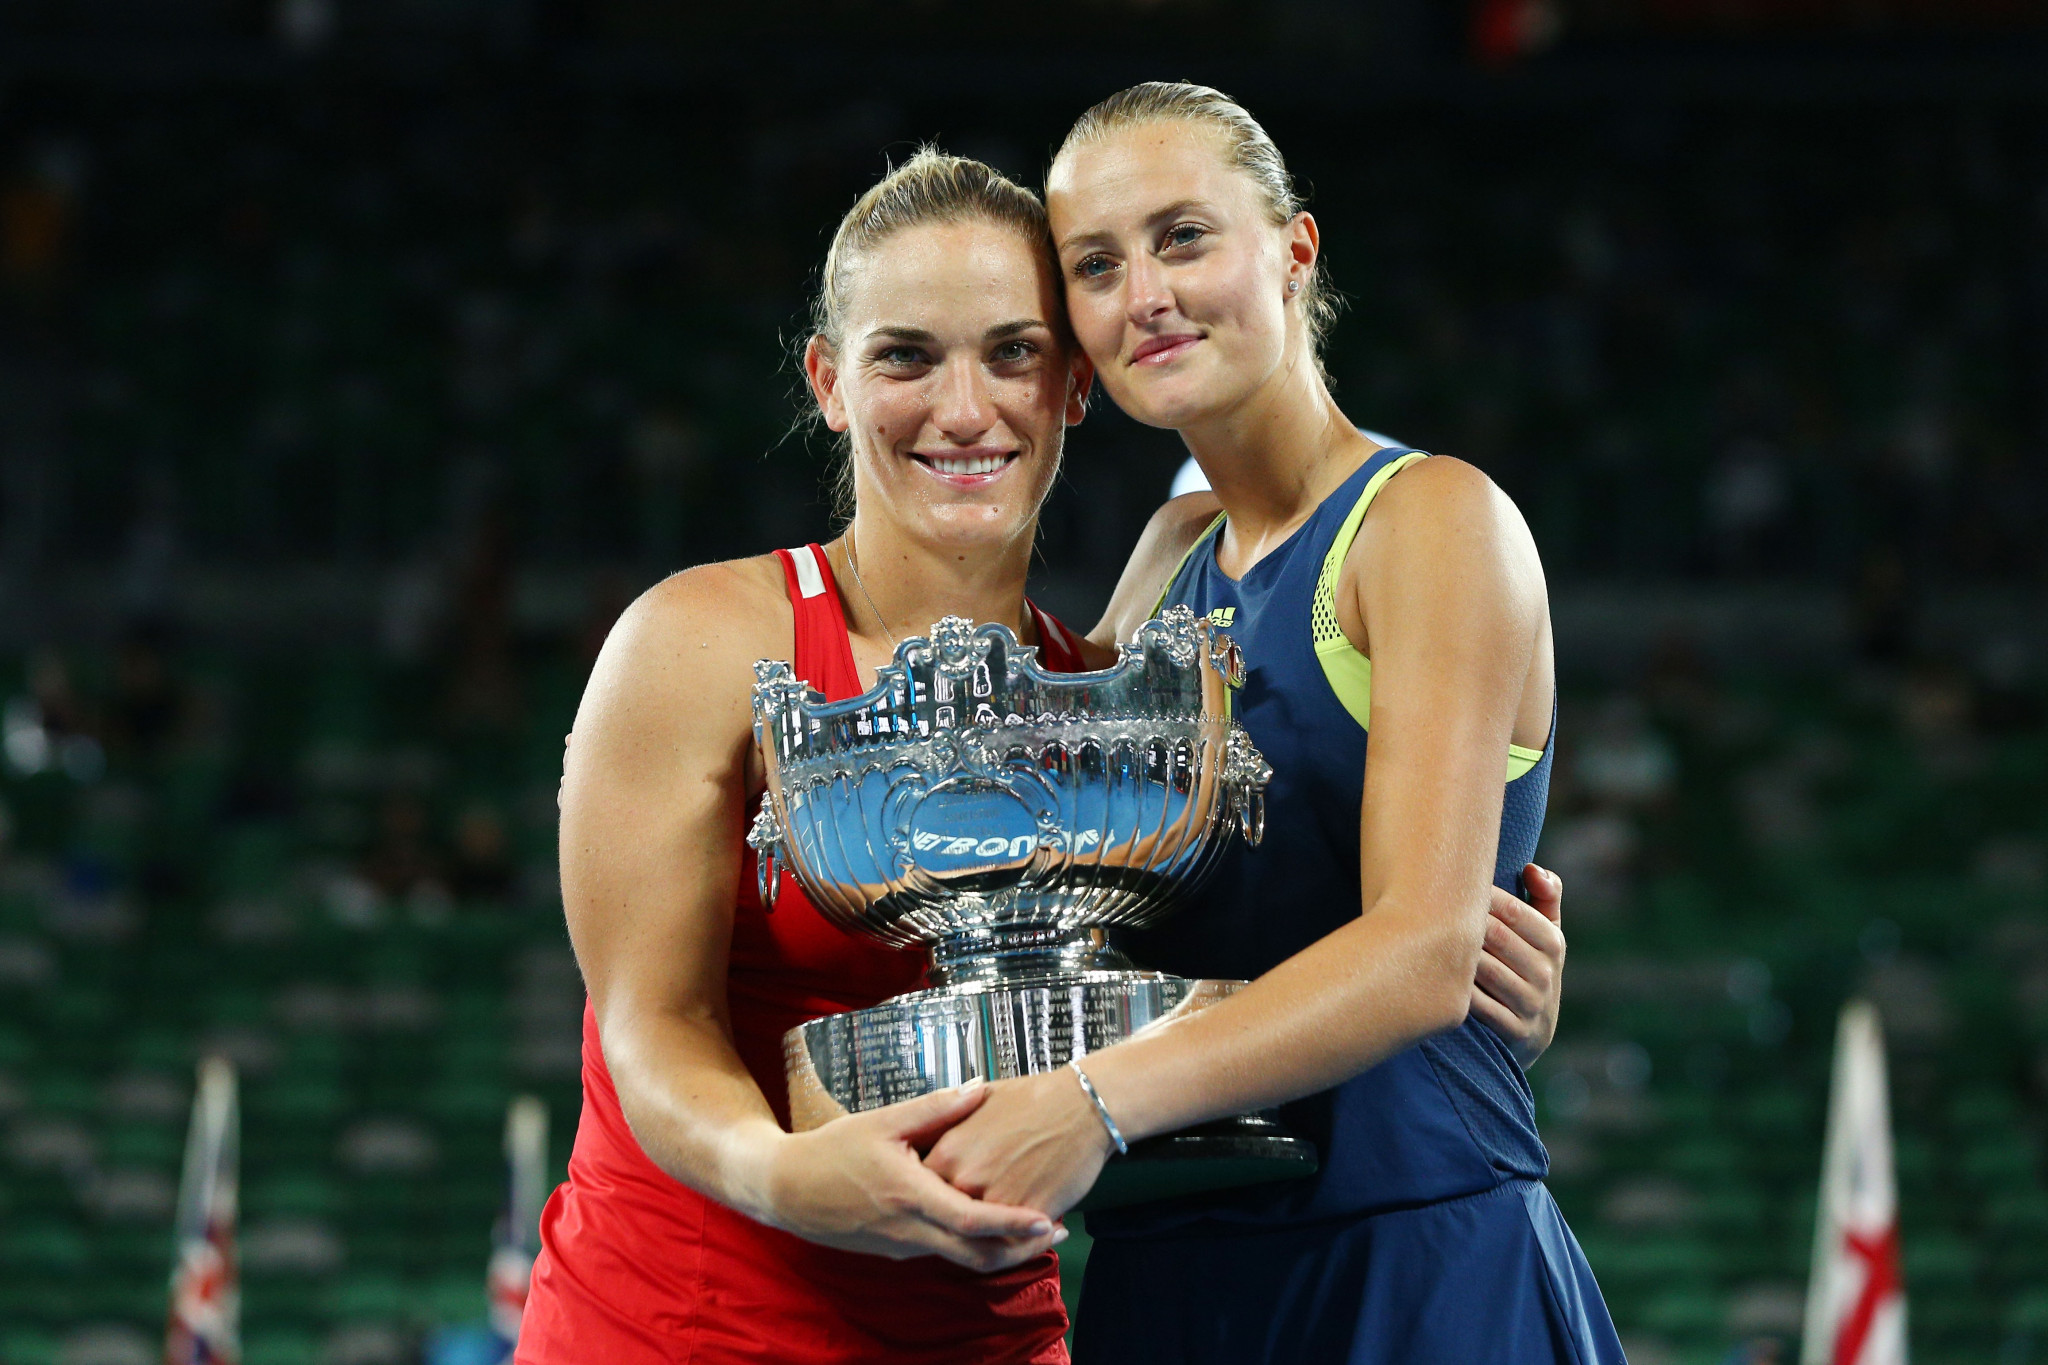  Kristina Mladenovic and Timea Babos won the women's doubles title ©Getty Images